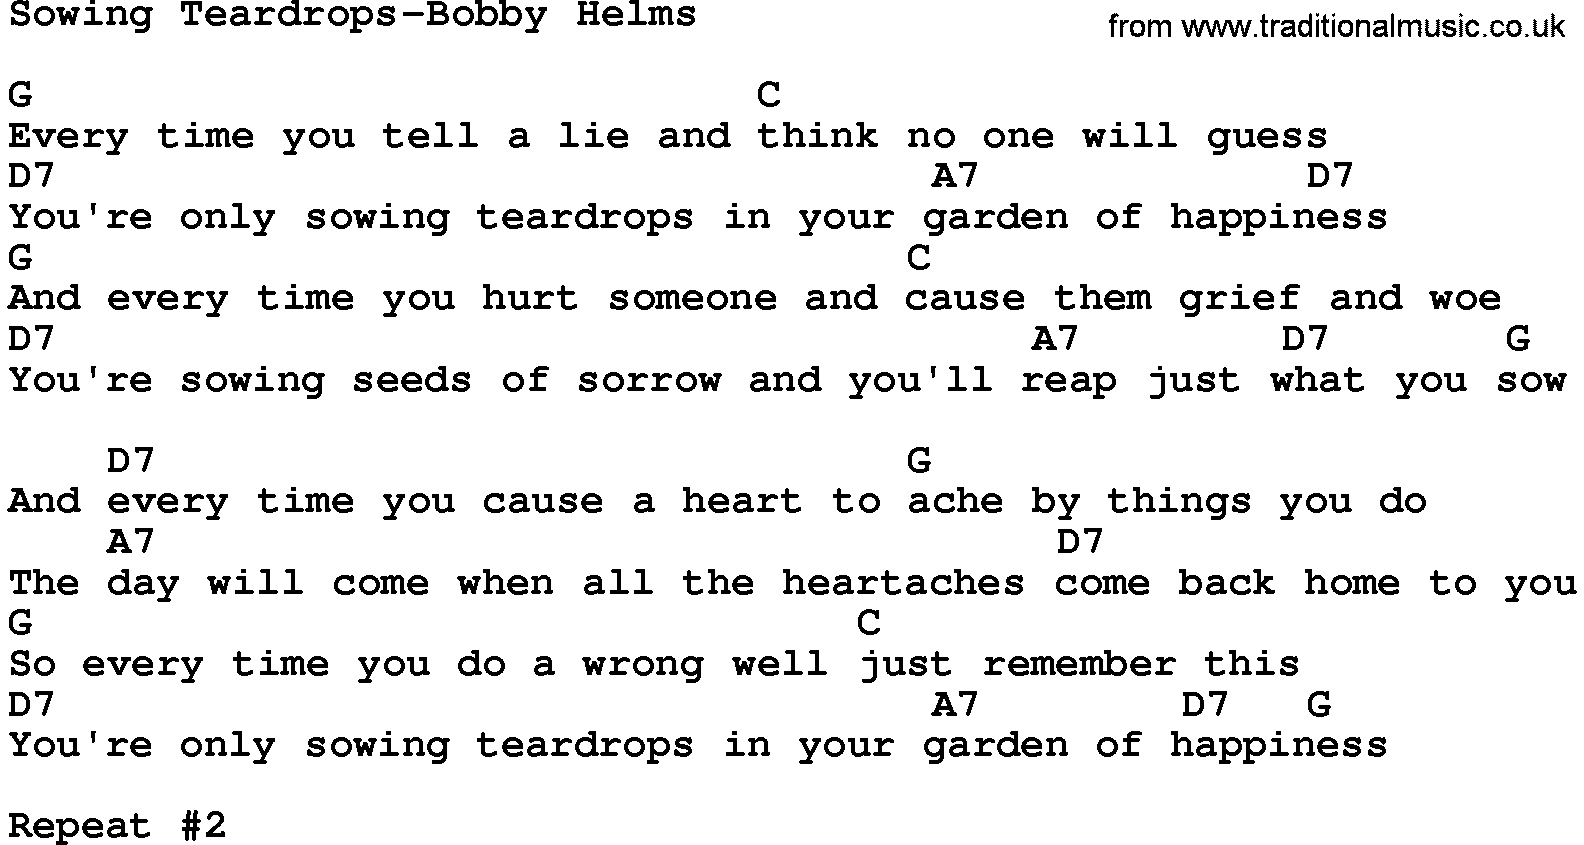 Country music song: Sowing Teardrops-Bobby Helms lyrics and chords